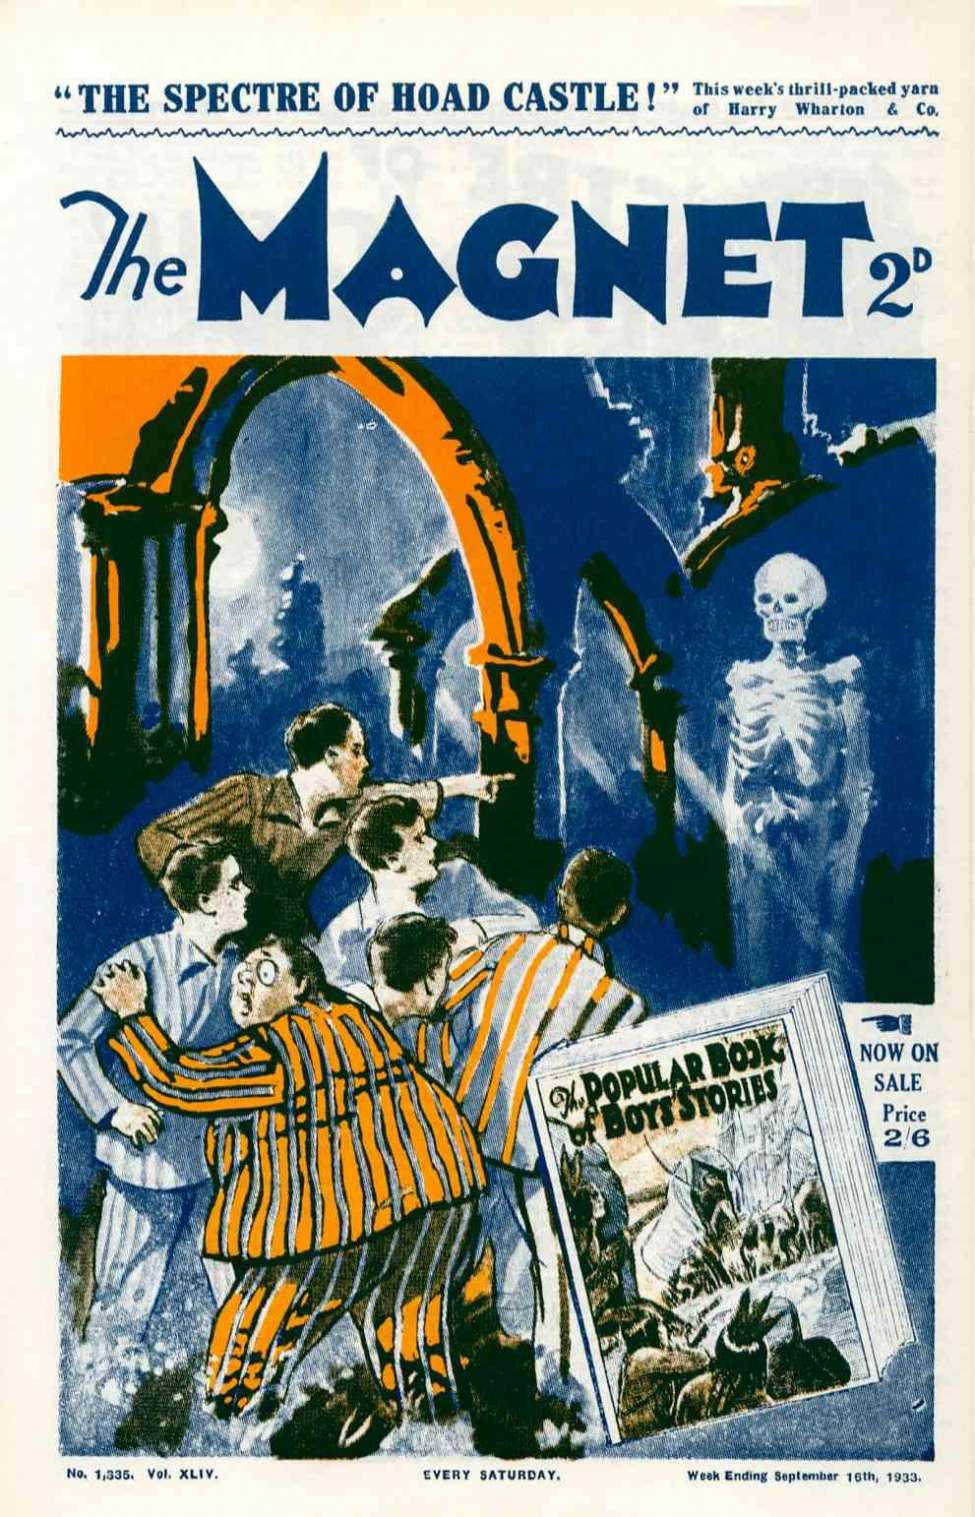 Book Cover For The Magnet 1335 - The Spectre of Head Castle!